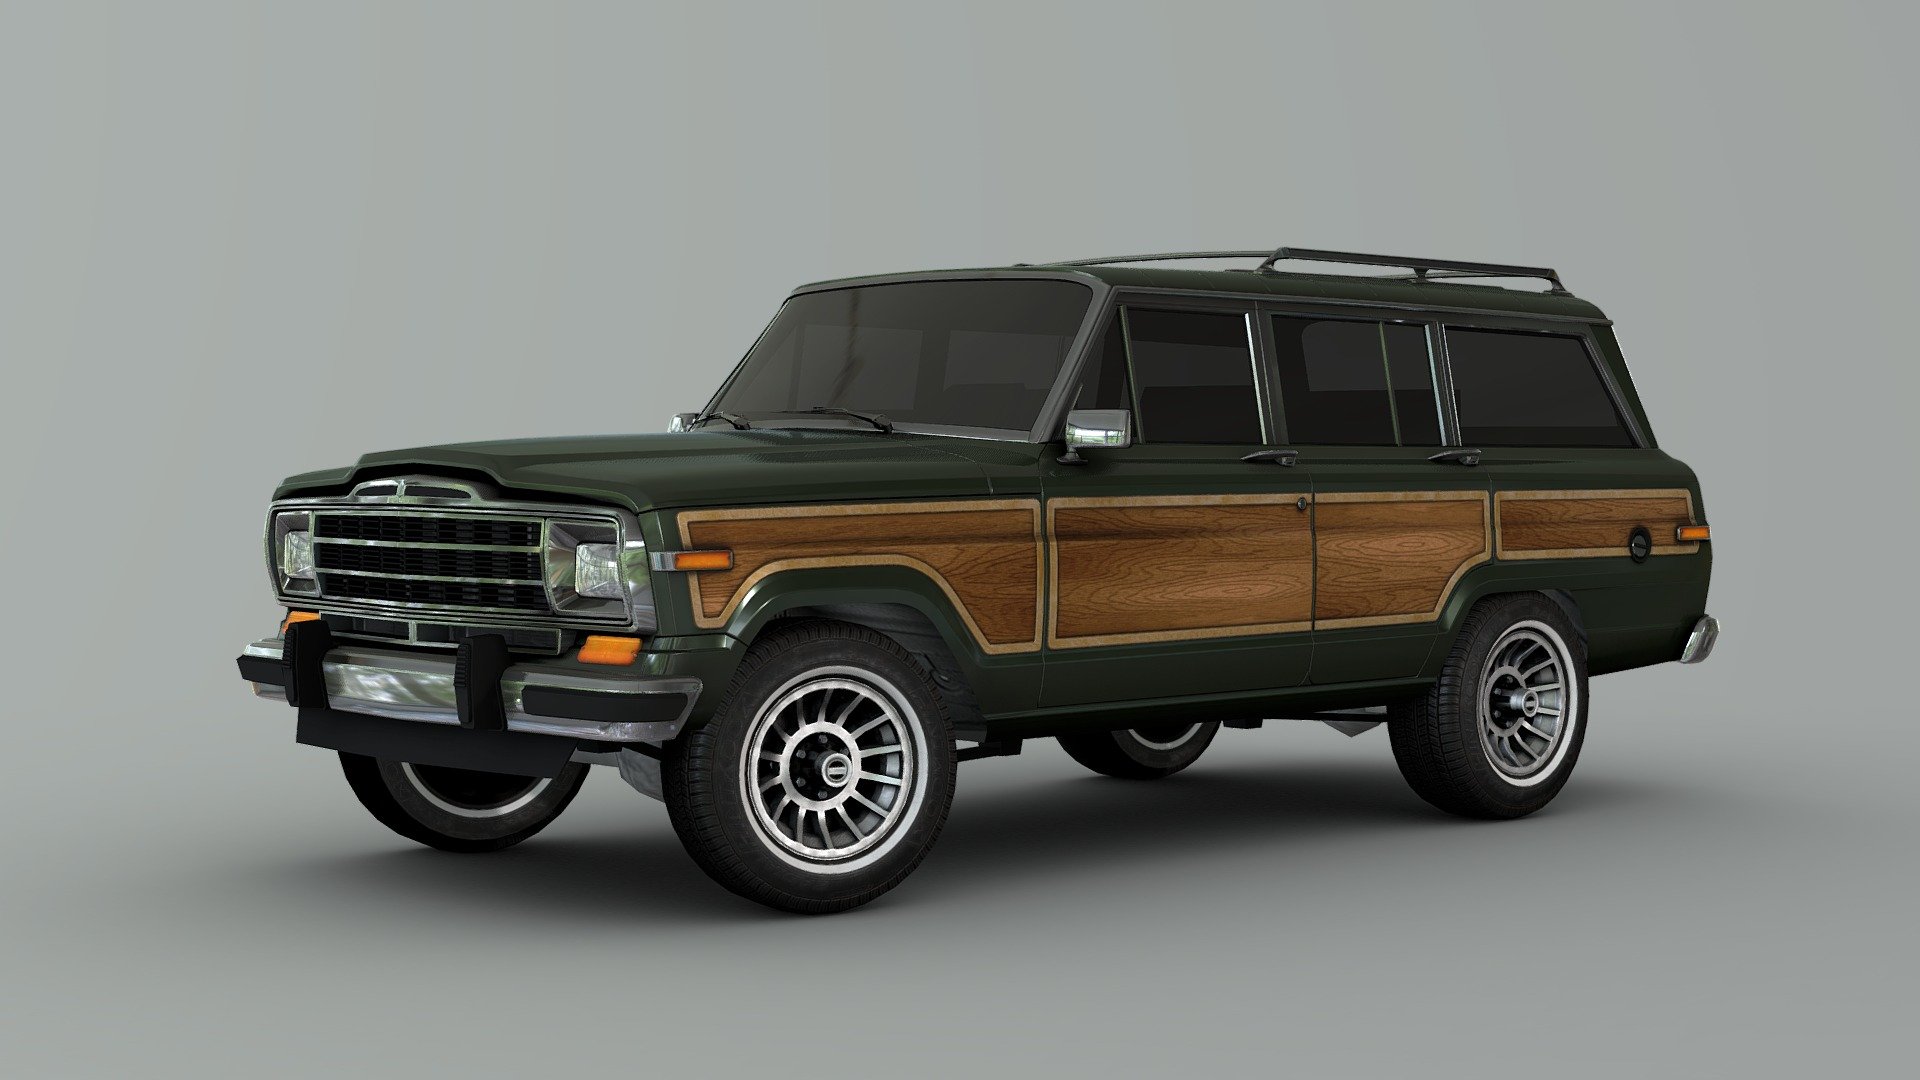 Follow us on instagram 👍🏻

Jeep Wagoneer low-poly 3d model ready for Virtual Reality (VR), Augmented Reality (AR), games and other real-time apps 3d model